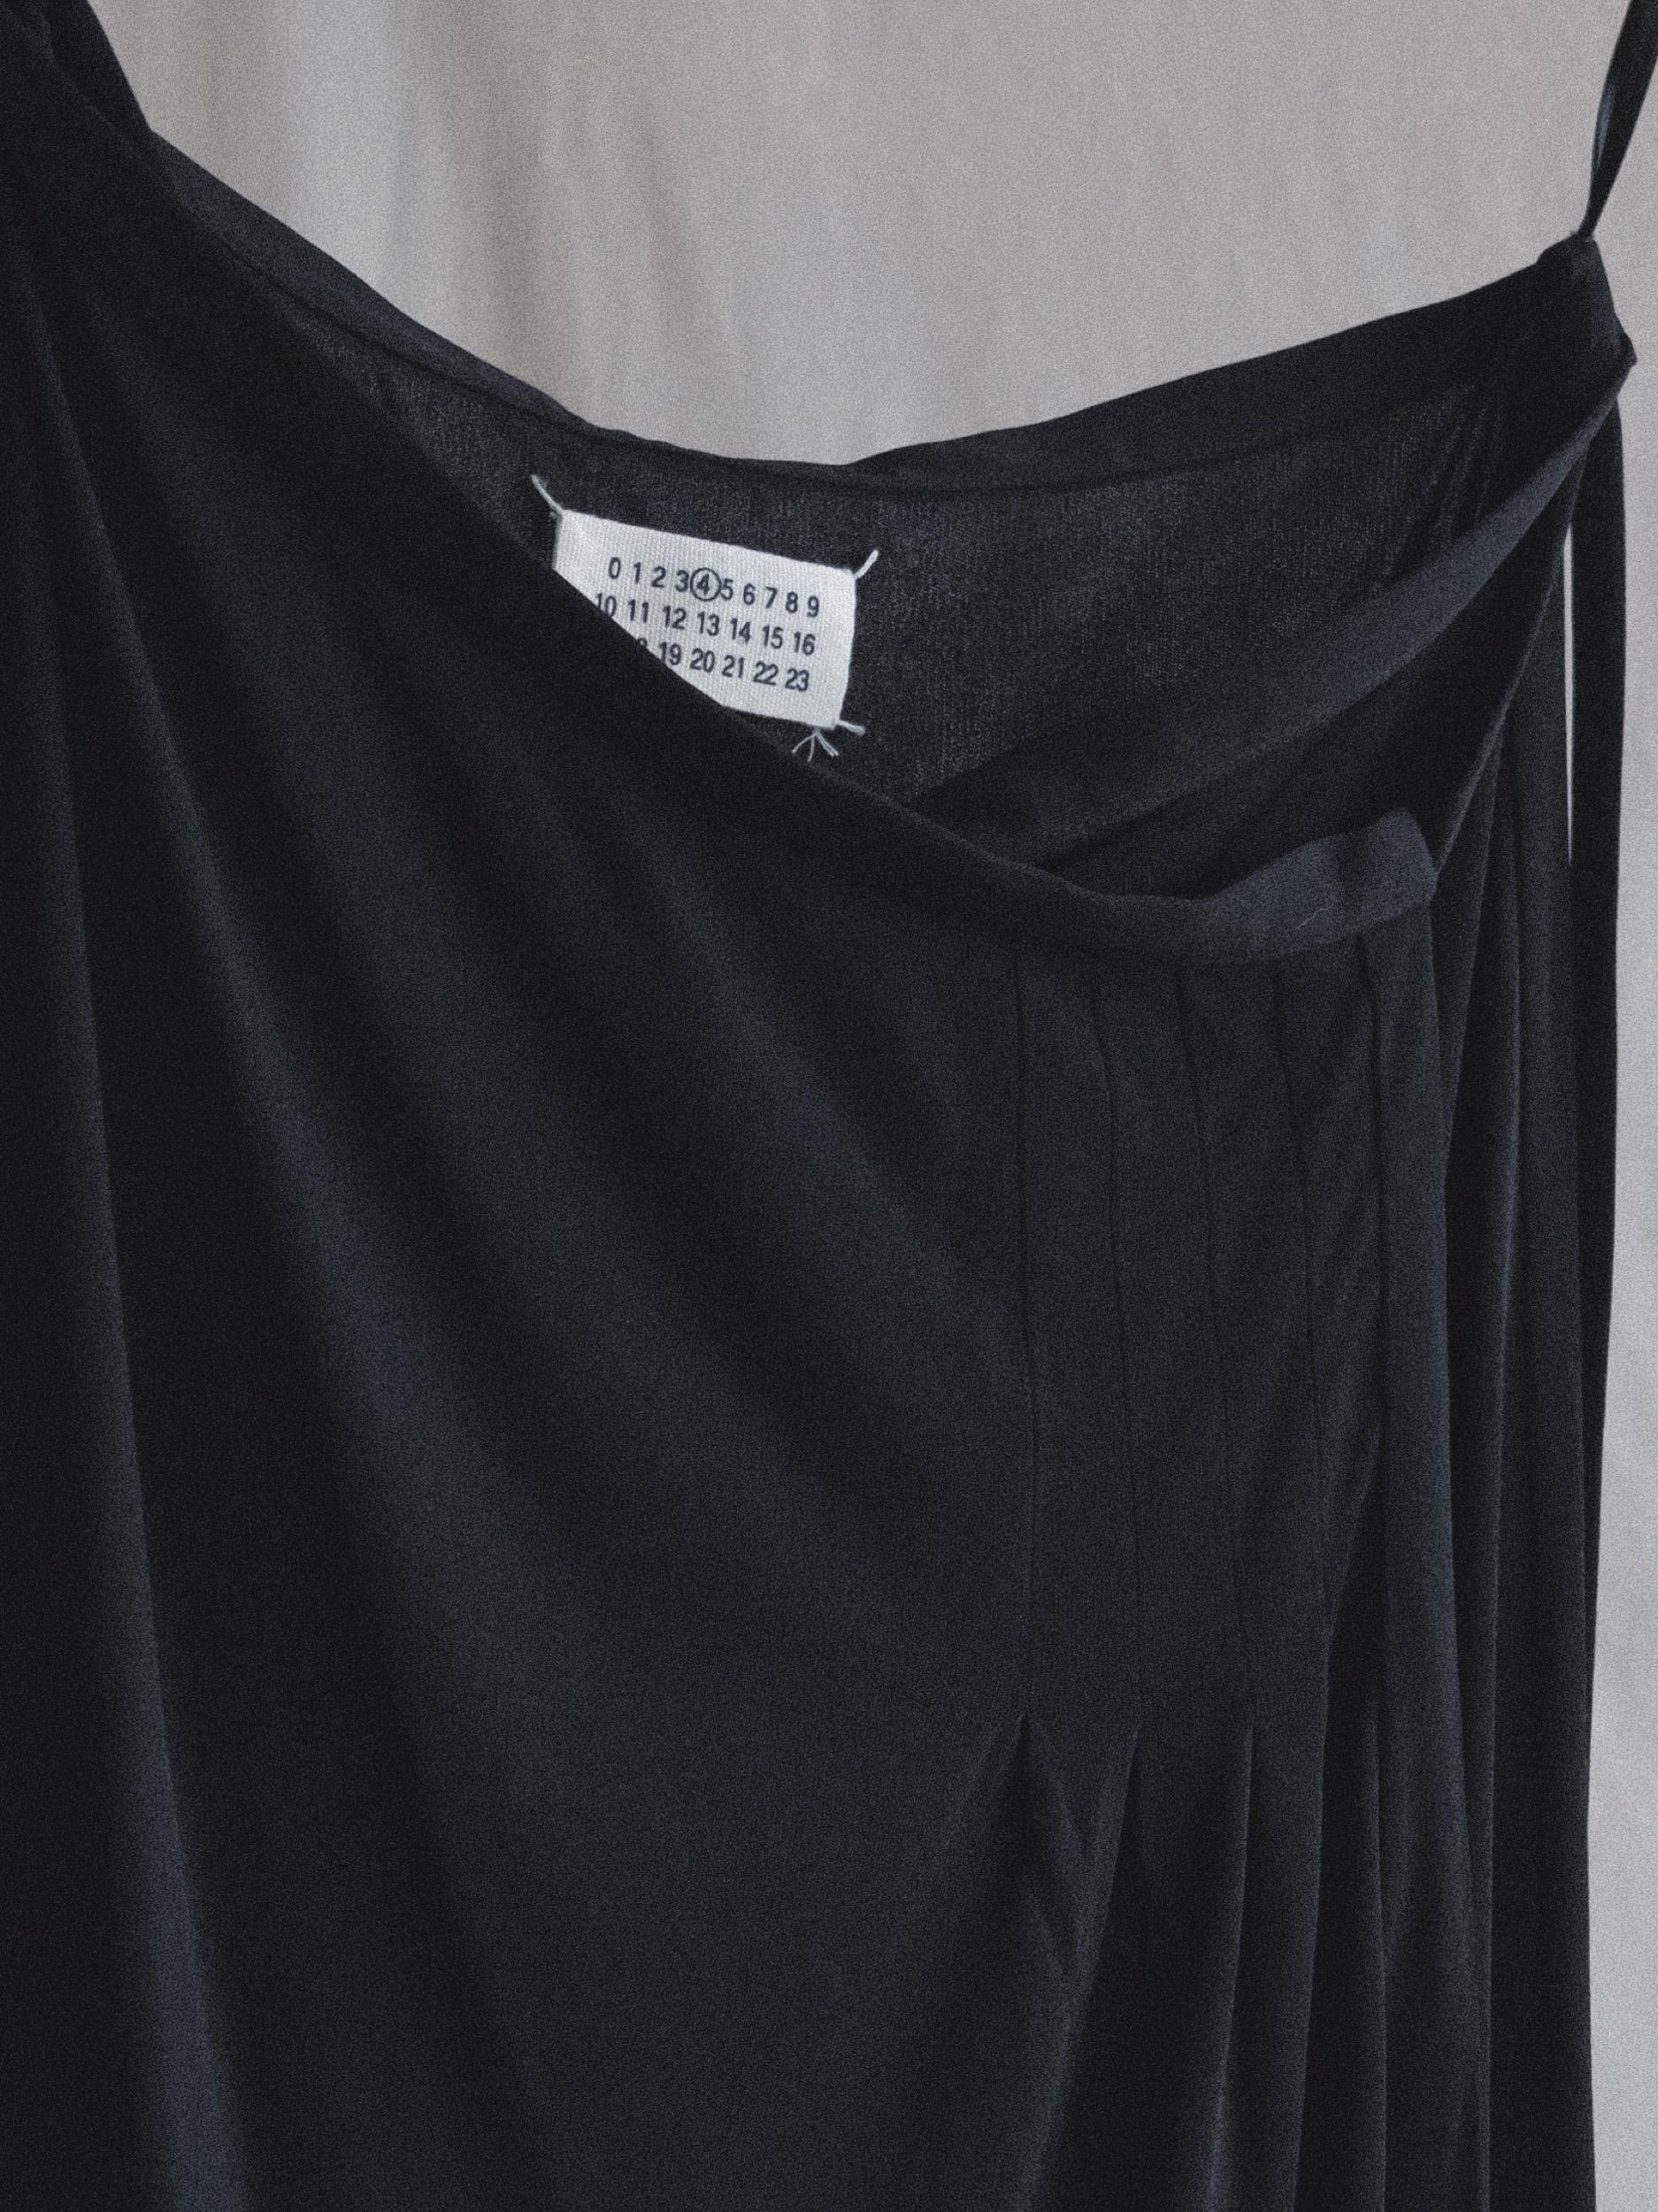 Margiela Wrap Skirt Black Line 4 Medium/One Size In Good Condition For Sale In Los Angeles, CA